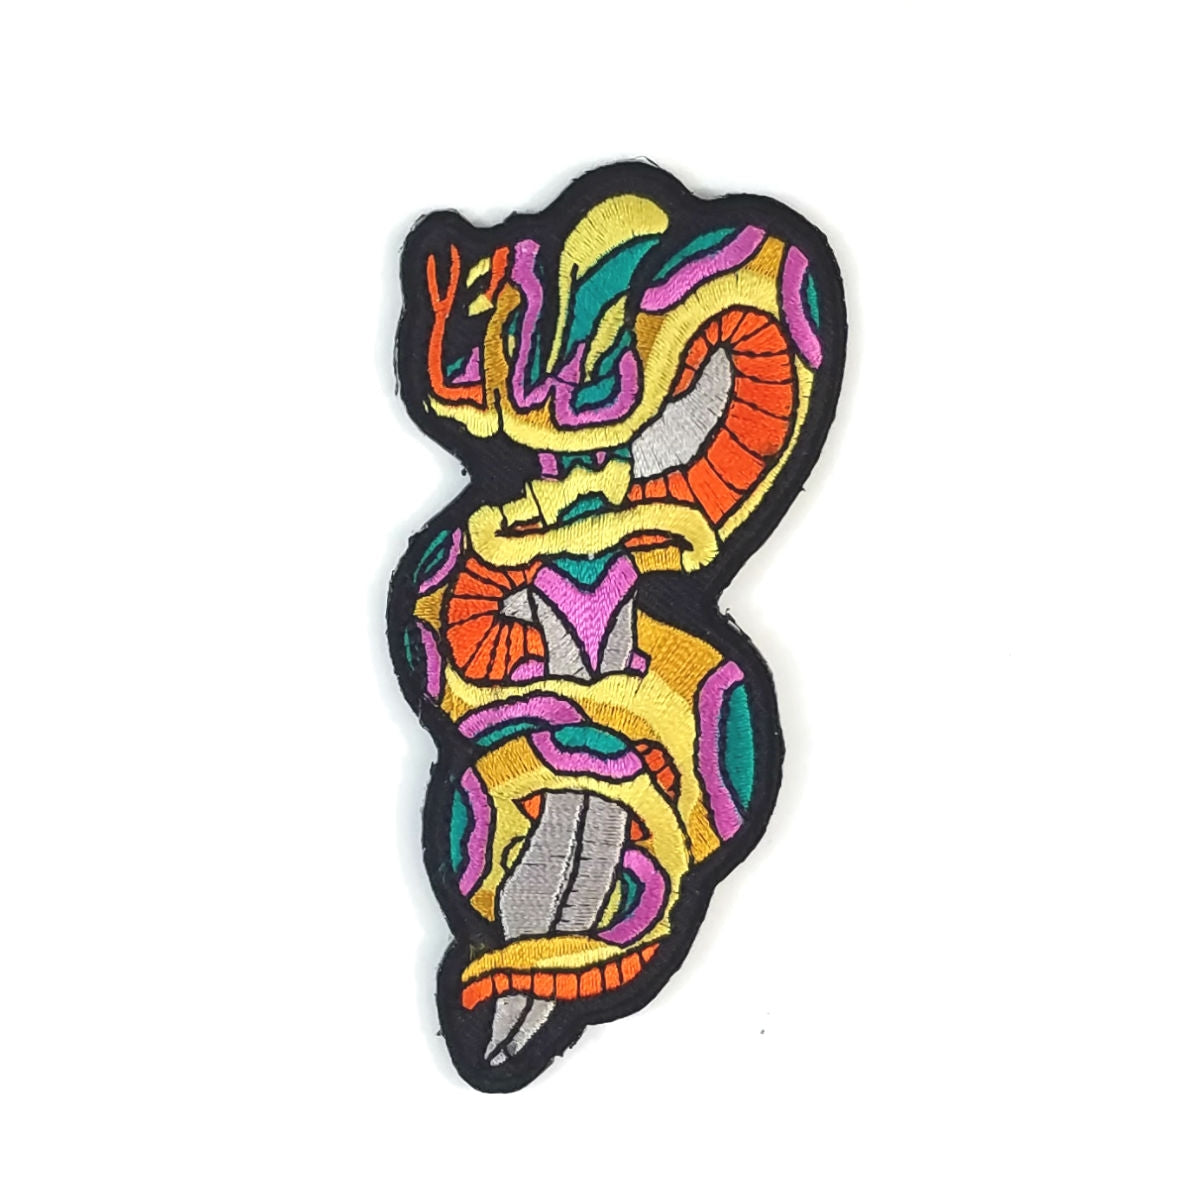 Traditional tattoo flash inspired 3.5" embroidered snake & dagger patch